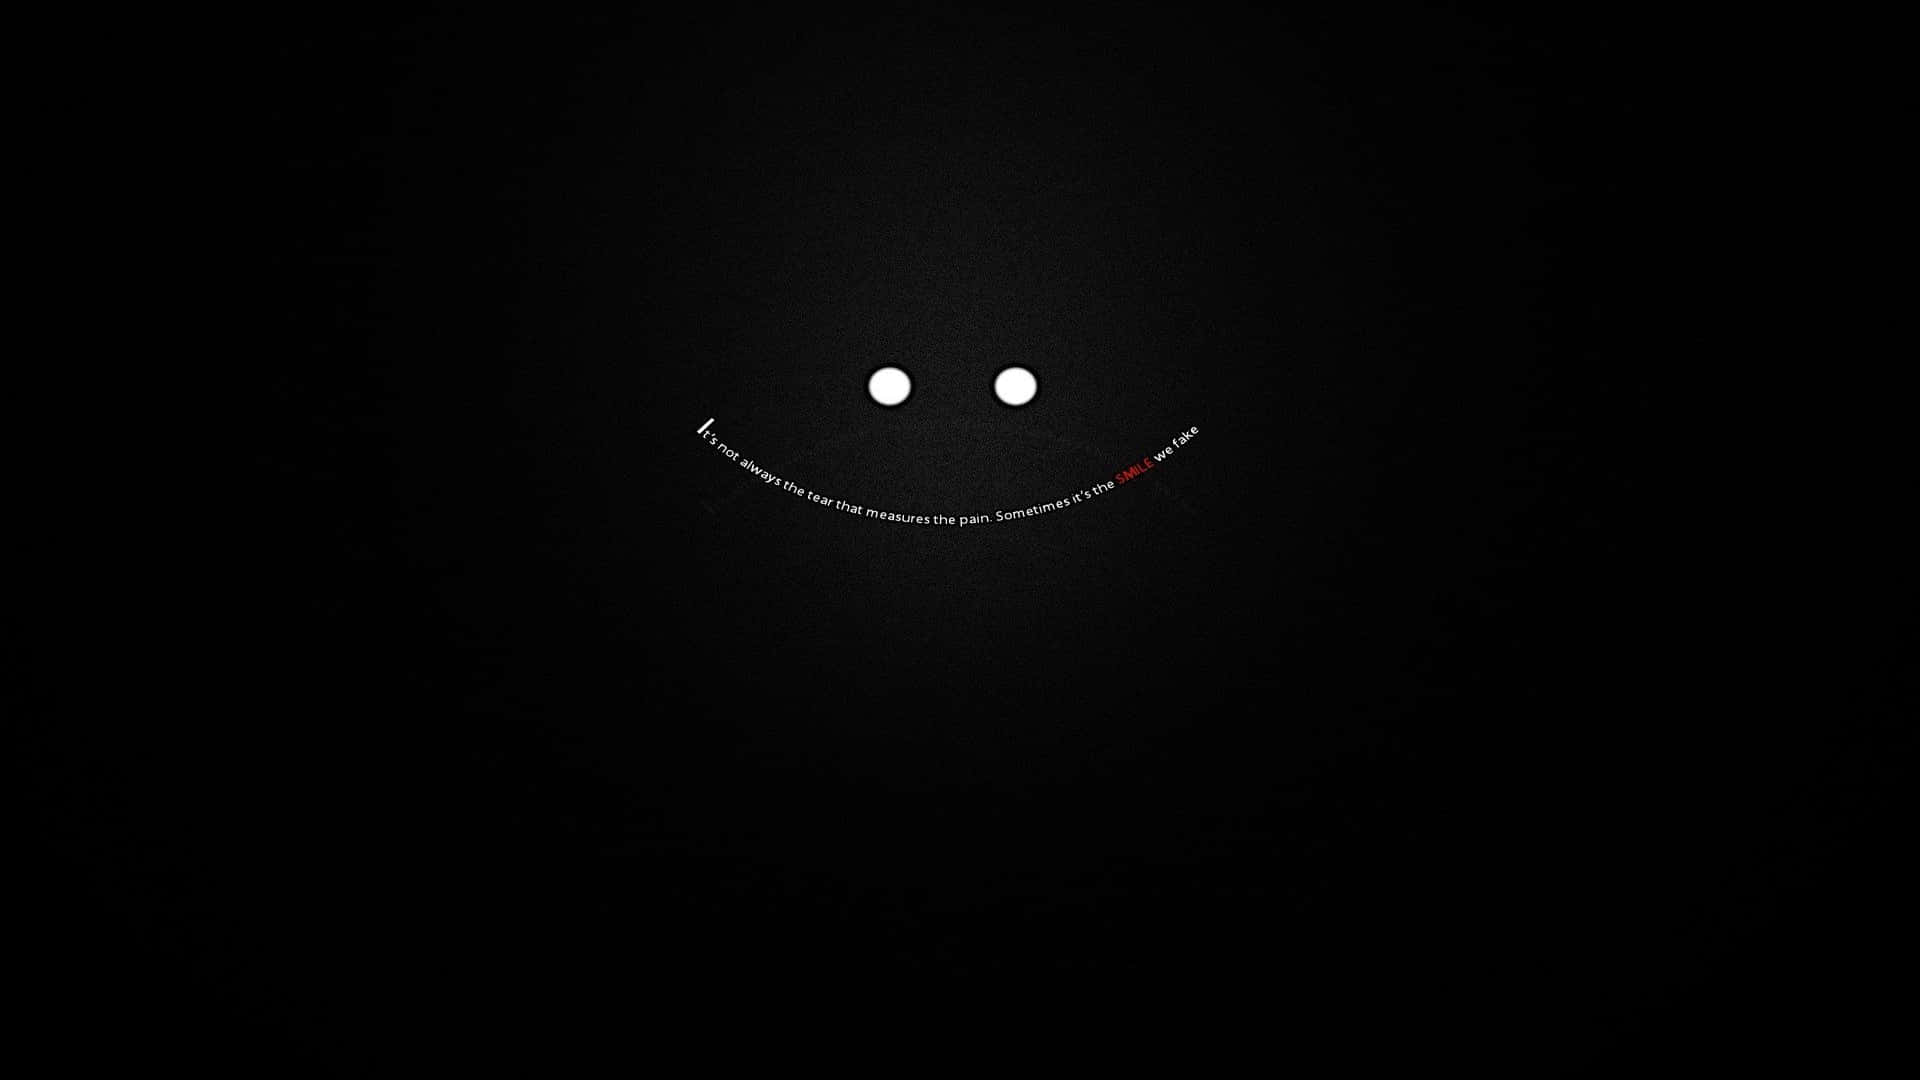 A Black Background With A Smiley Face On It